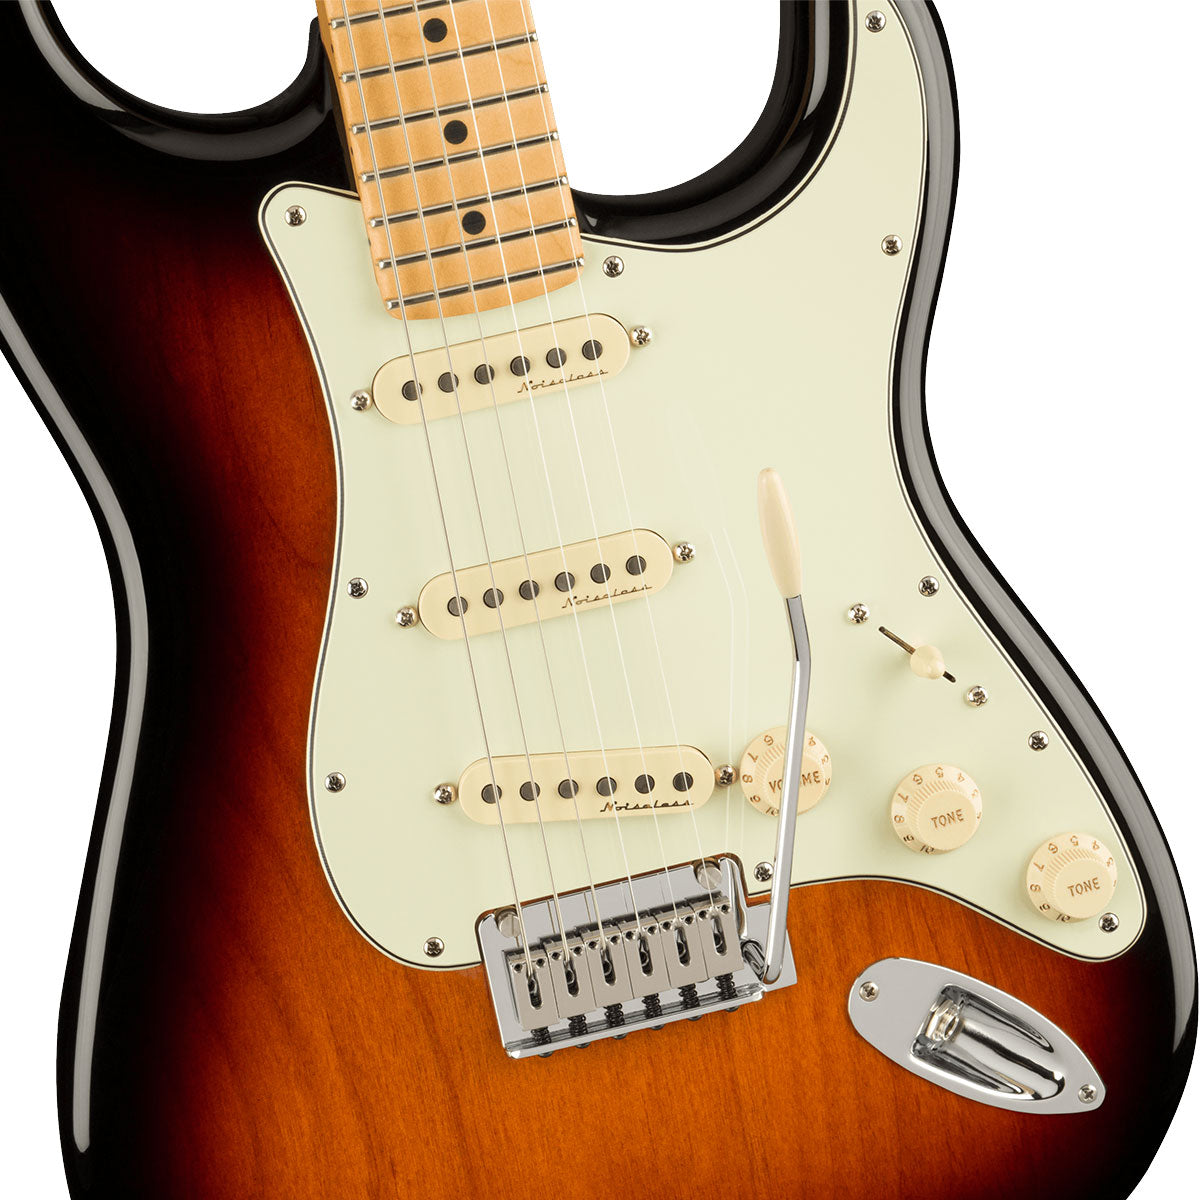 Detail top view of Fender Player Plus Stratocaster - Maple, 3-Color Sunburst showing body